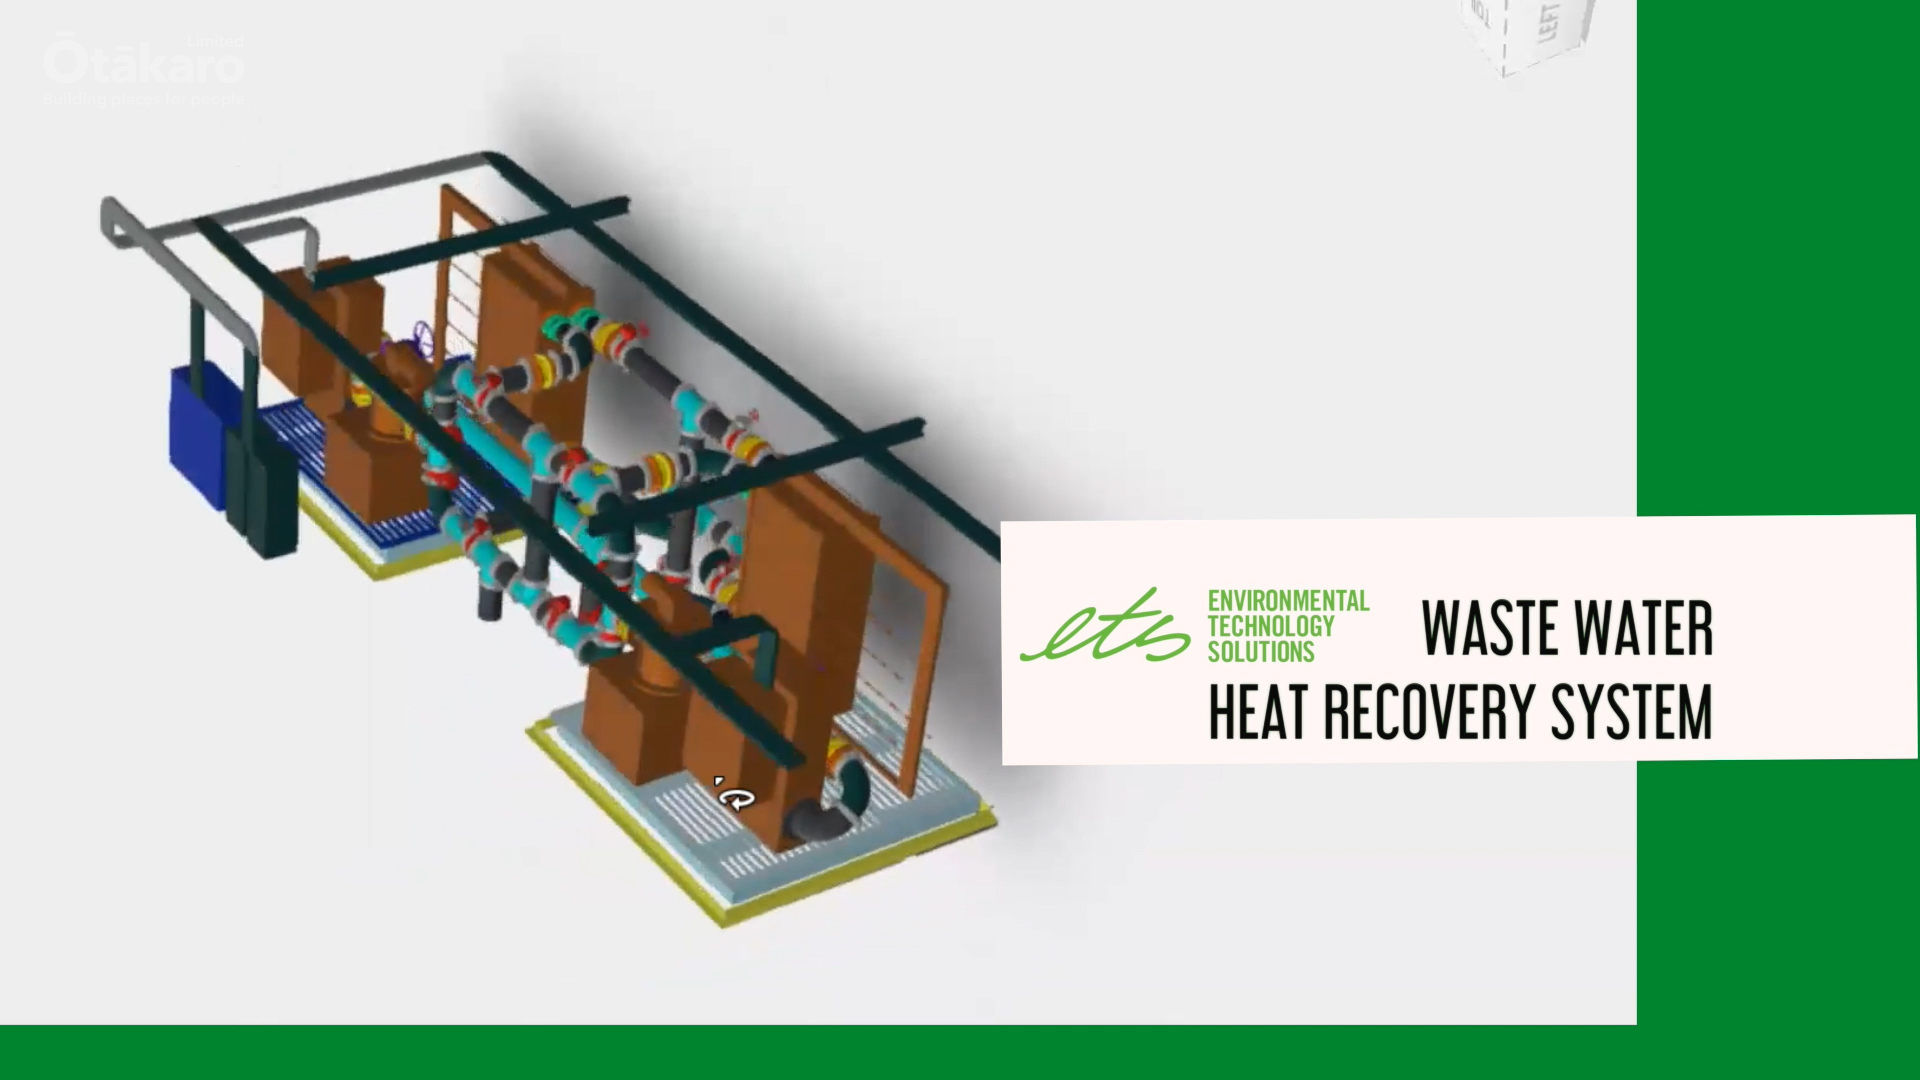 'Waste water heat recovery system